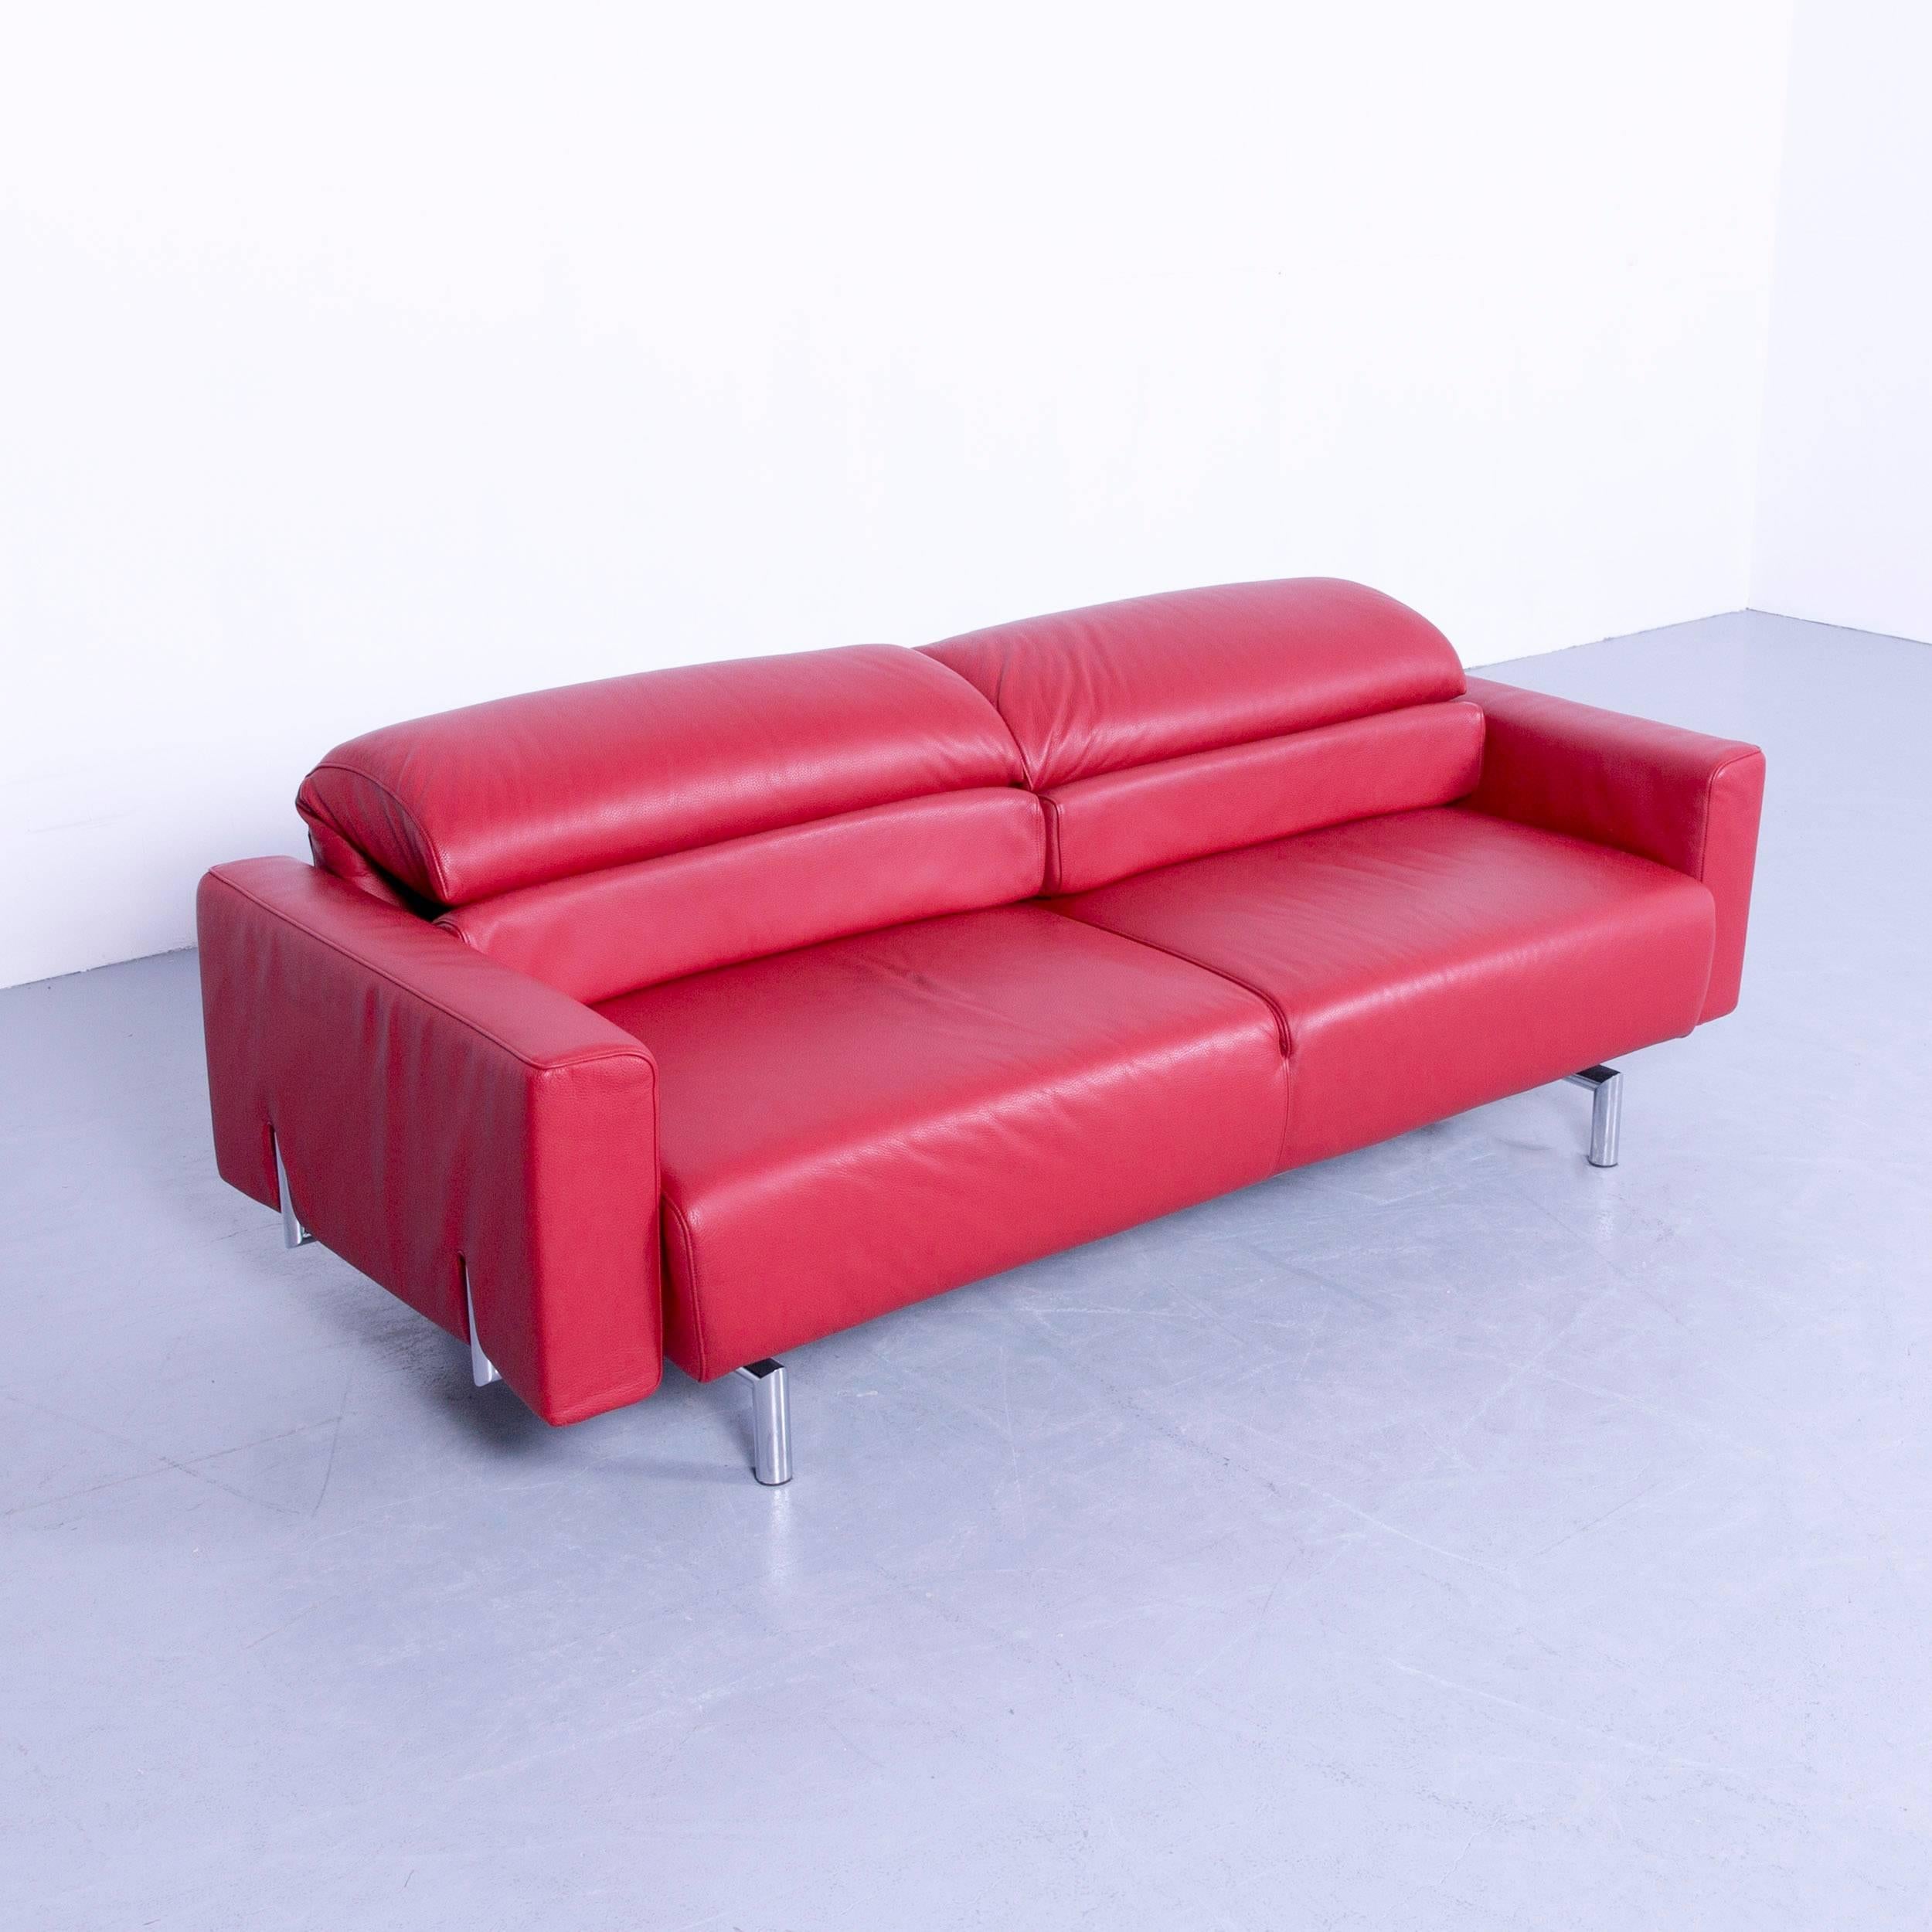 Swiss Strässle Matteo Designer Sofa Leather Red Relax Function Two-Seat Modern For Sale